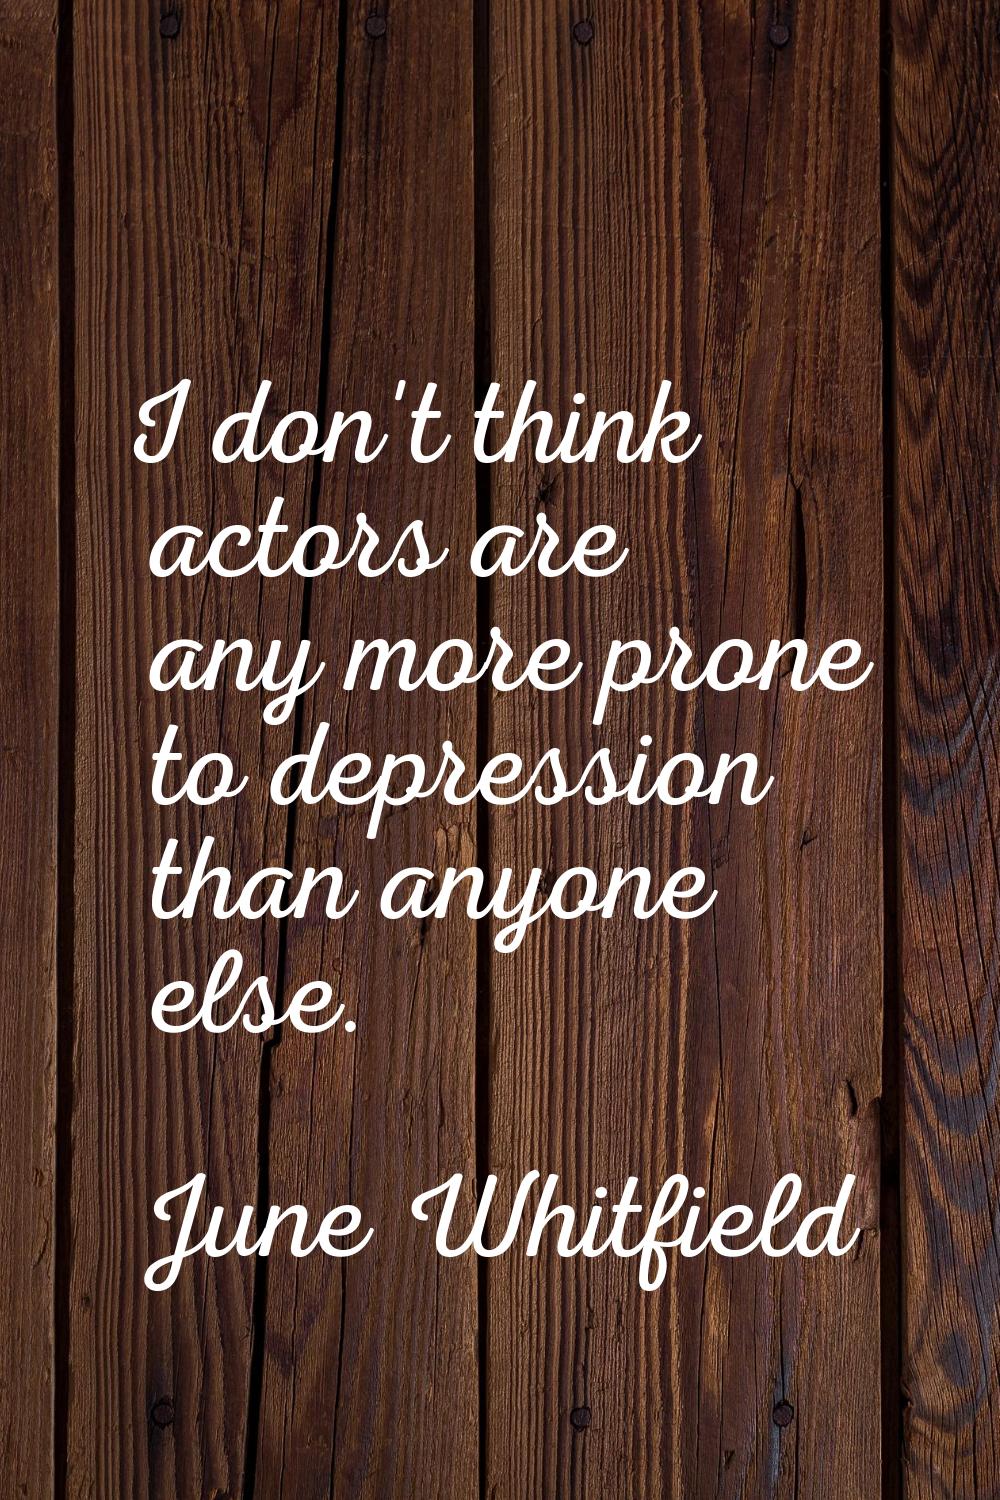 I don't think actors are any more prone to depression than anyone else.